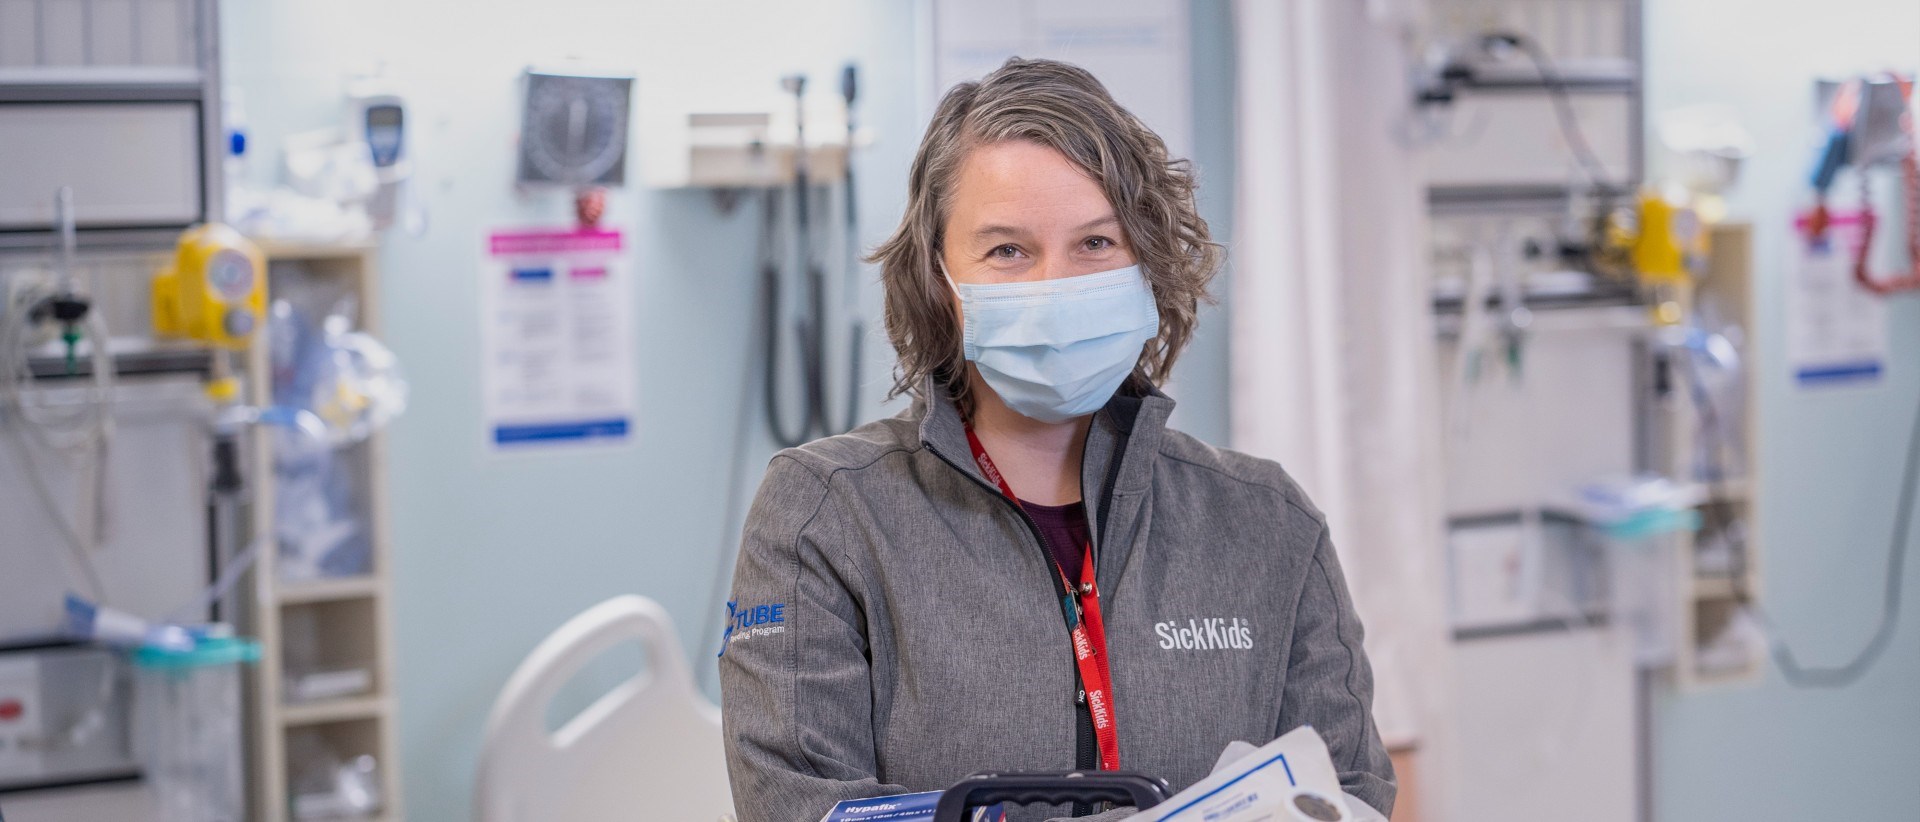 Holly Norgrove wearing a mask in a hospital room equipped with various devices and clinical equipment. She is wearing a sweater with stitching that says "SickKids" and "G-Tube feeding program". 